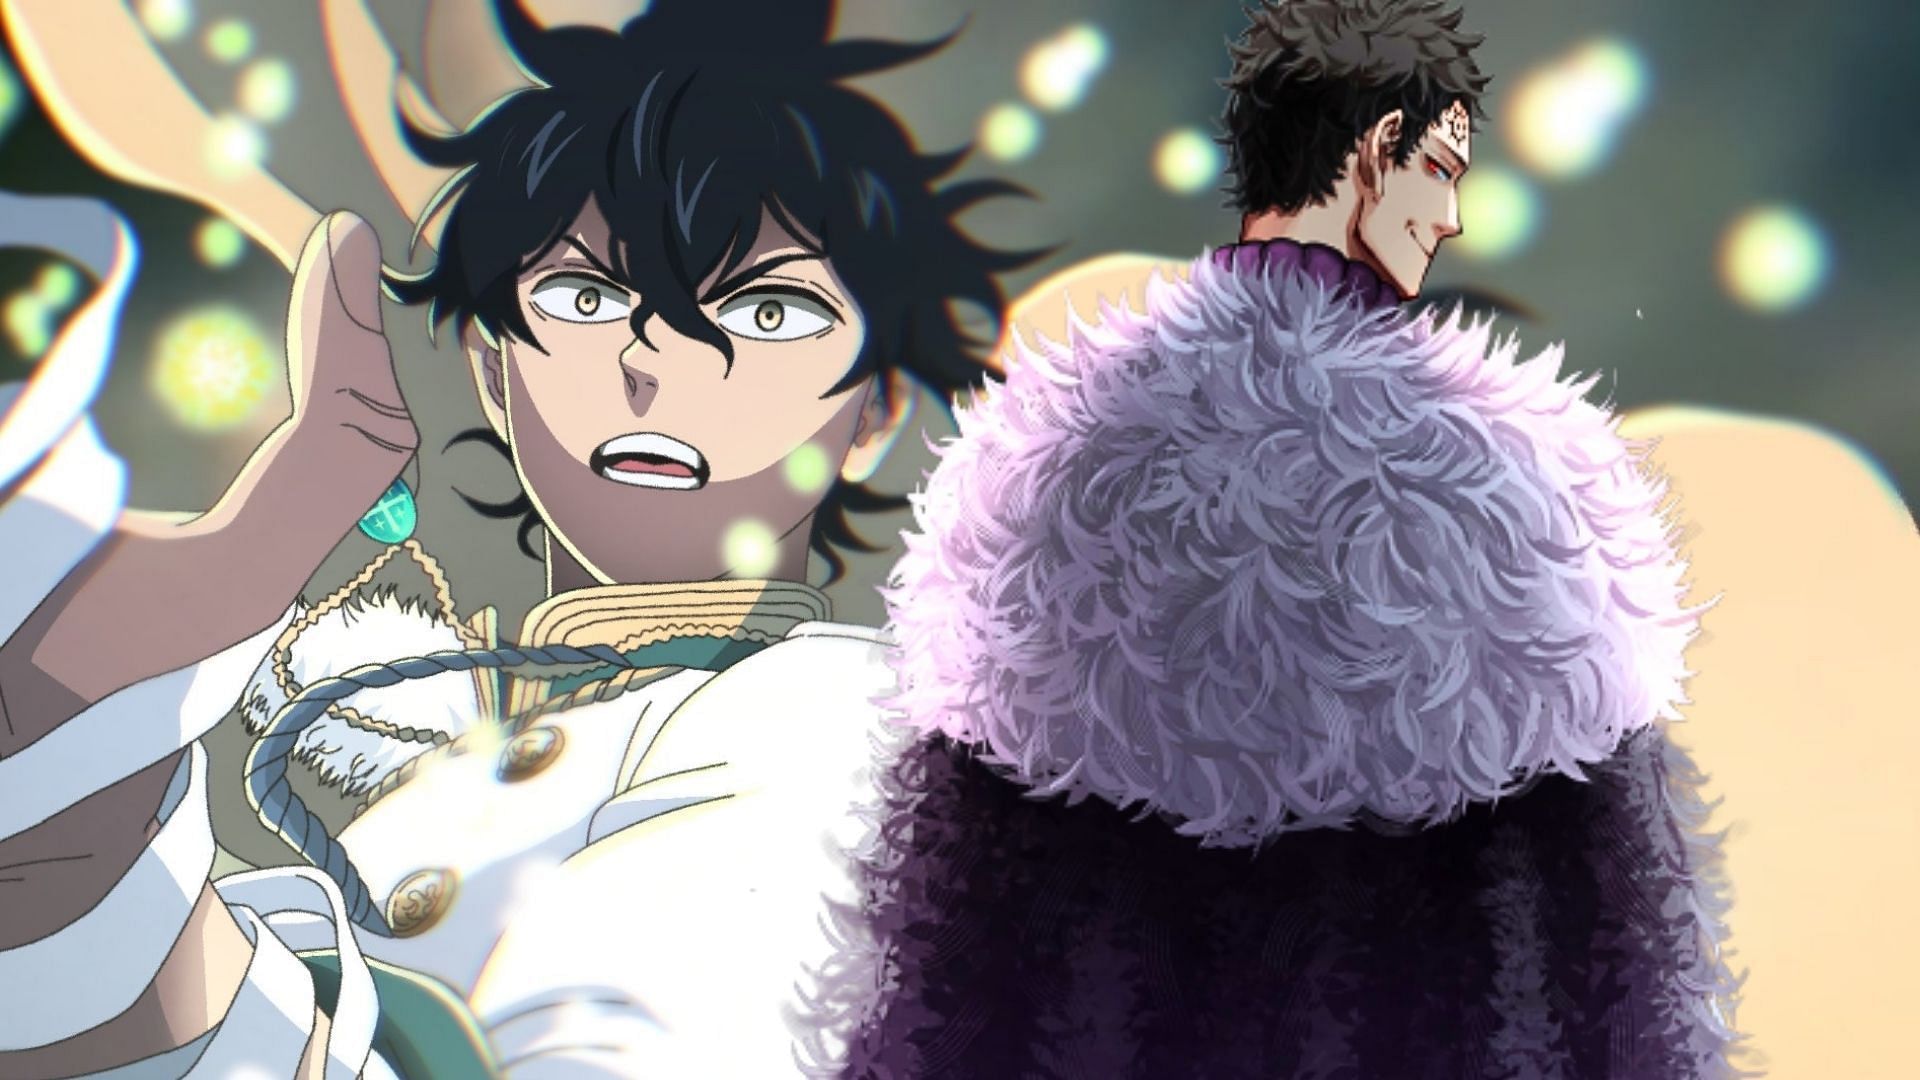 Yuno and Lucius as seen in Black Clover